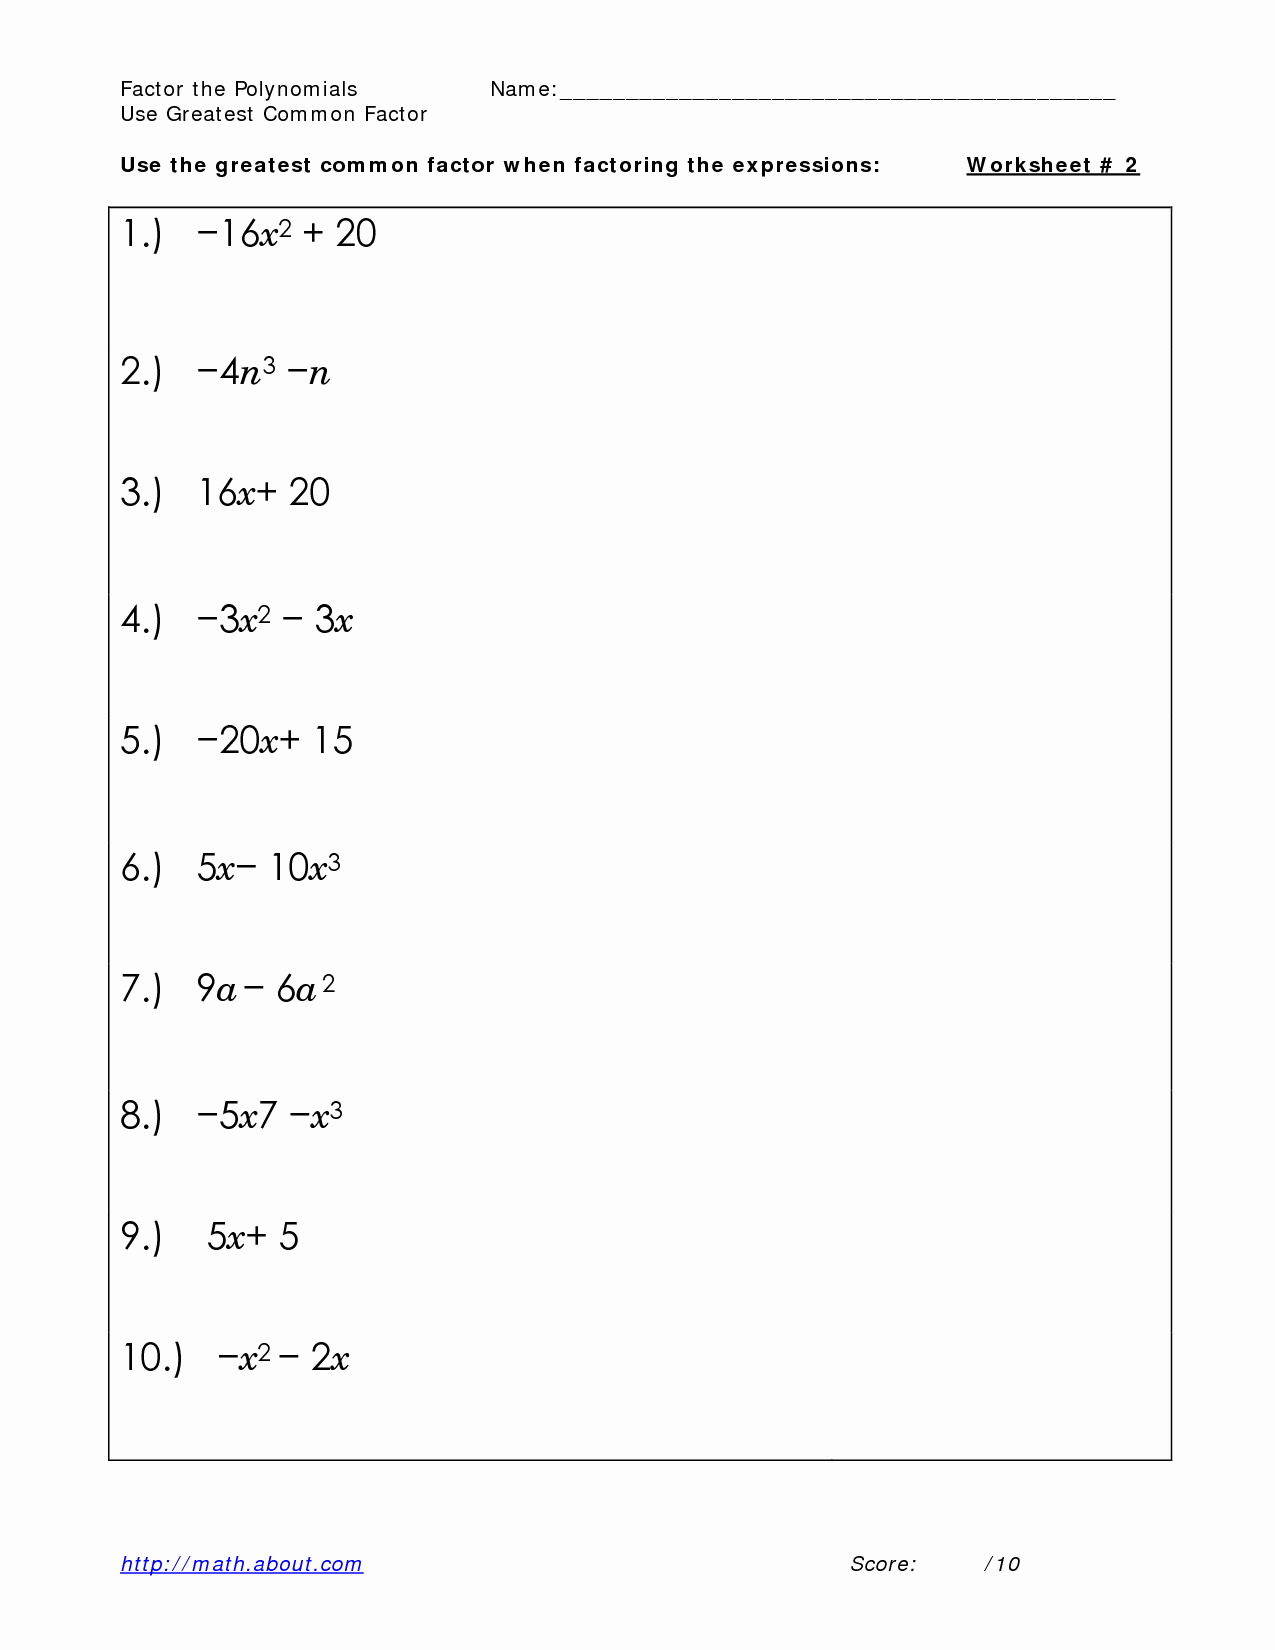 Factoring Practice Worksheet Answers Awesome 10 Best Of Factoring Polynomials Practice Worksheet